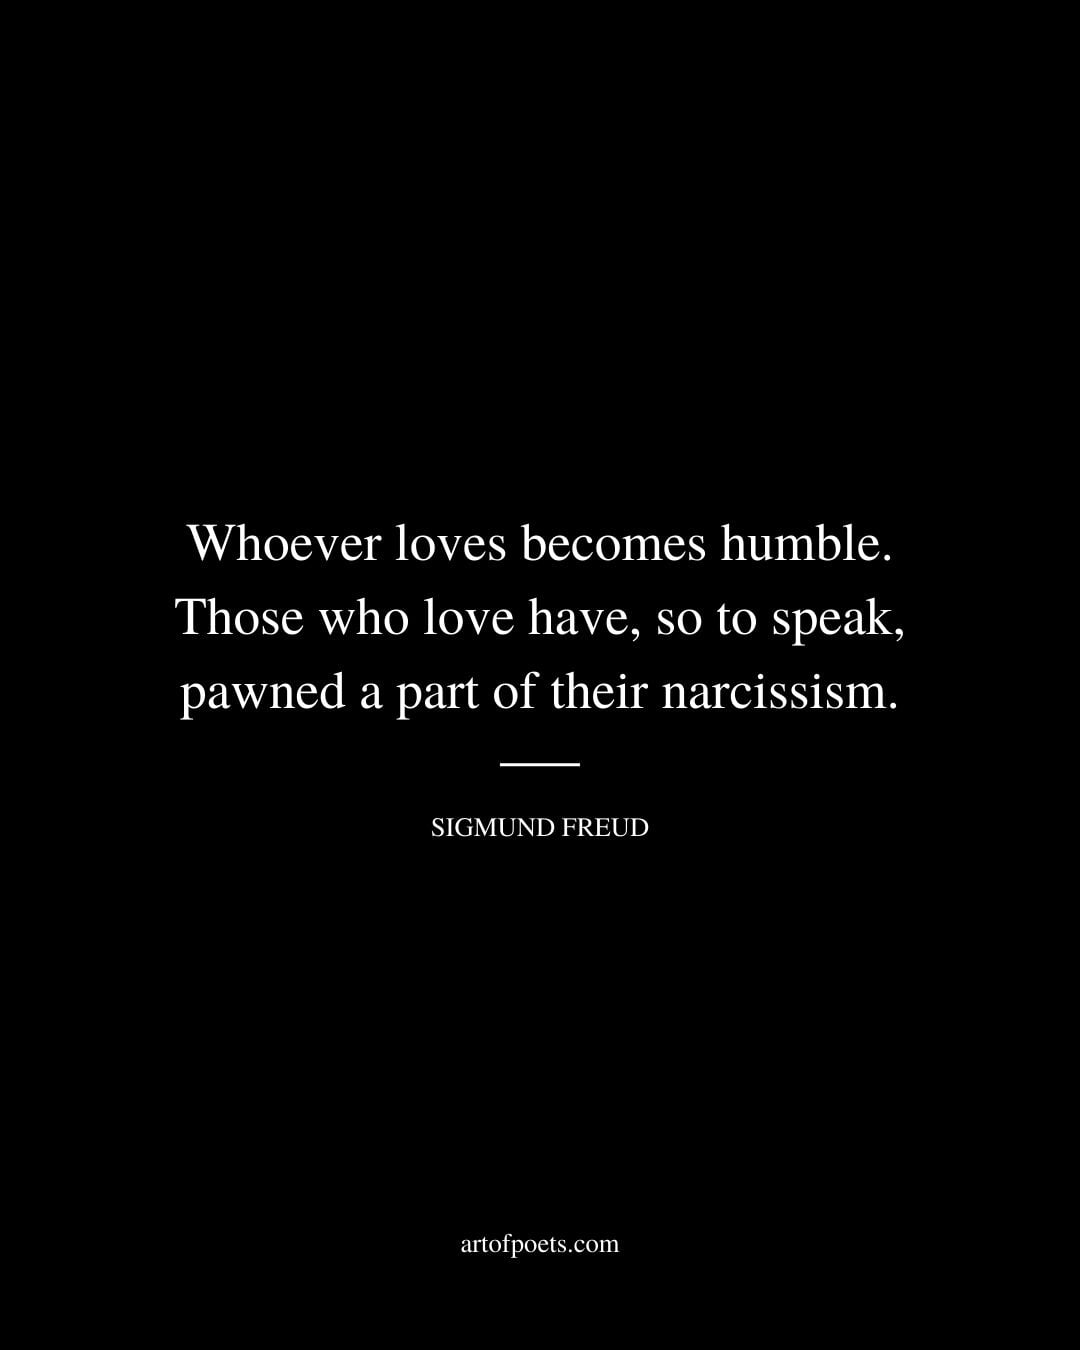 Whoever loves becomes humble. Those who love have so to speak pawned a part of their narcissism. Sigmund Freud